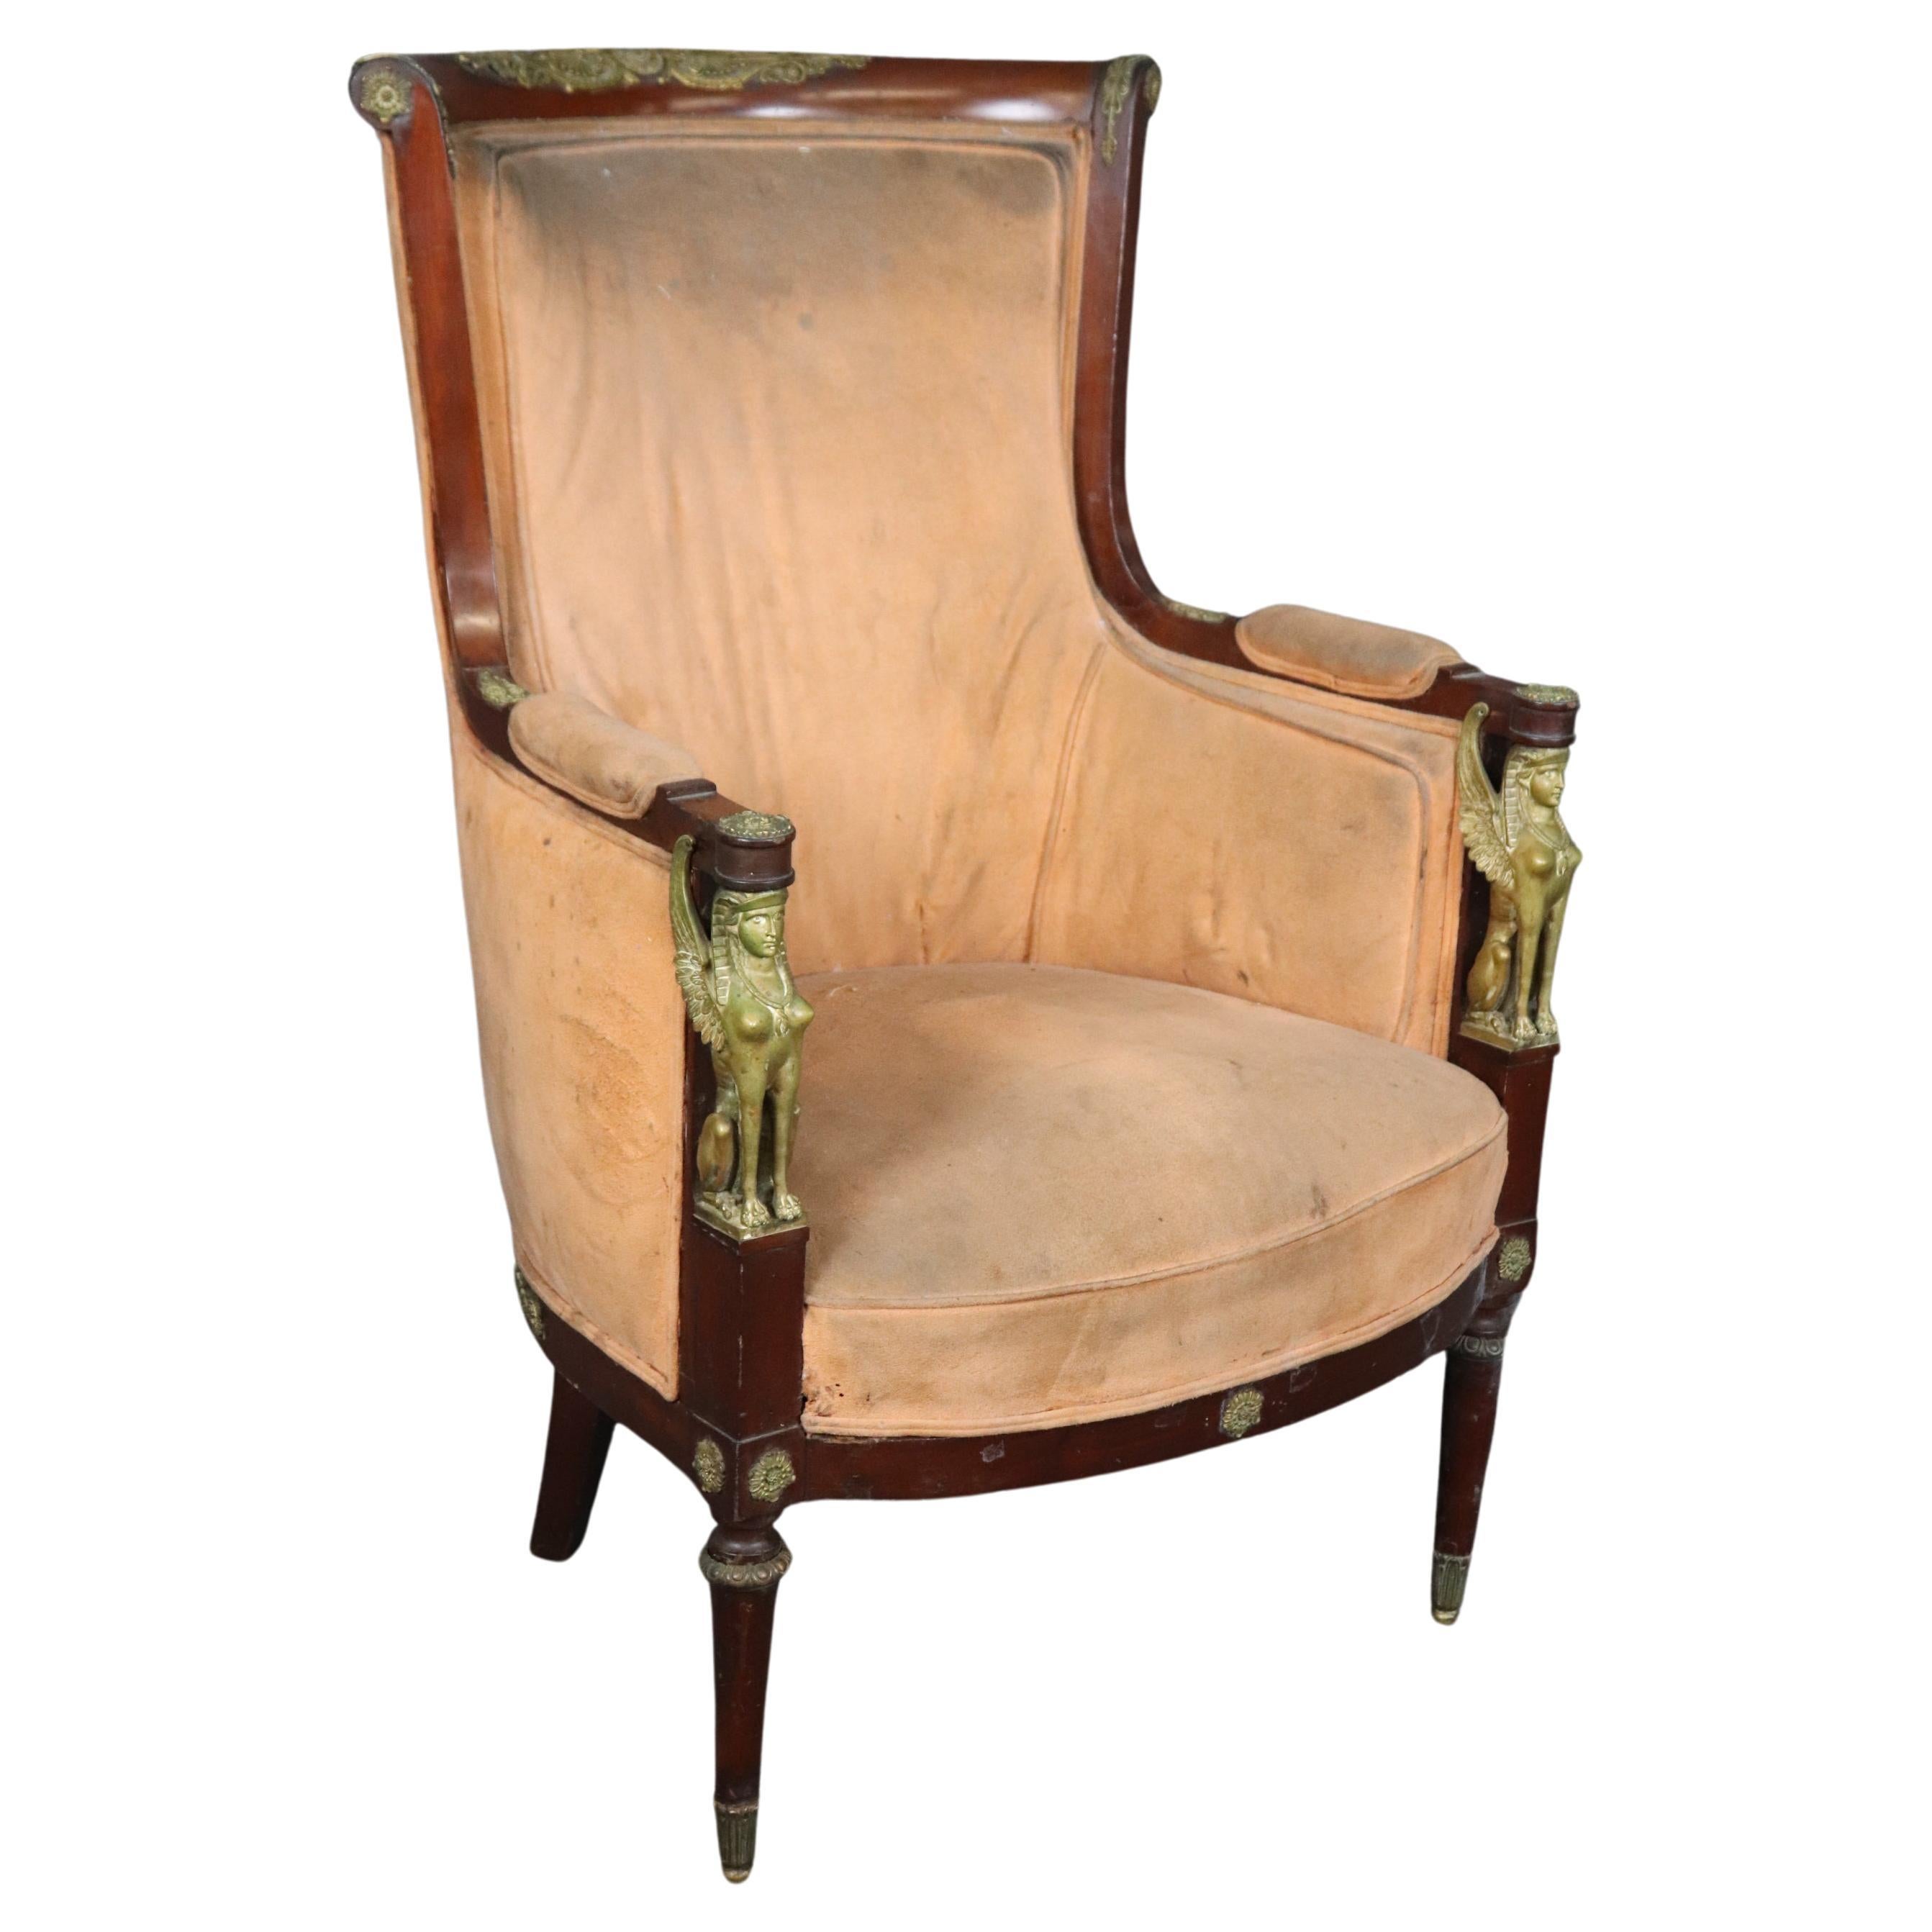 French Empire Egyptian Revival Solid Mahogany Bergere Chair with Bronze Sphinxs